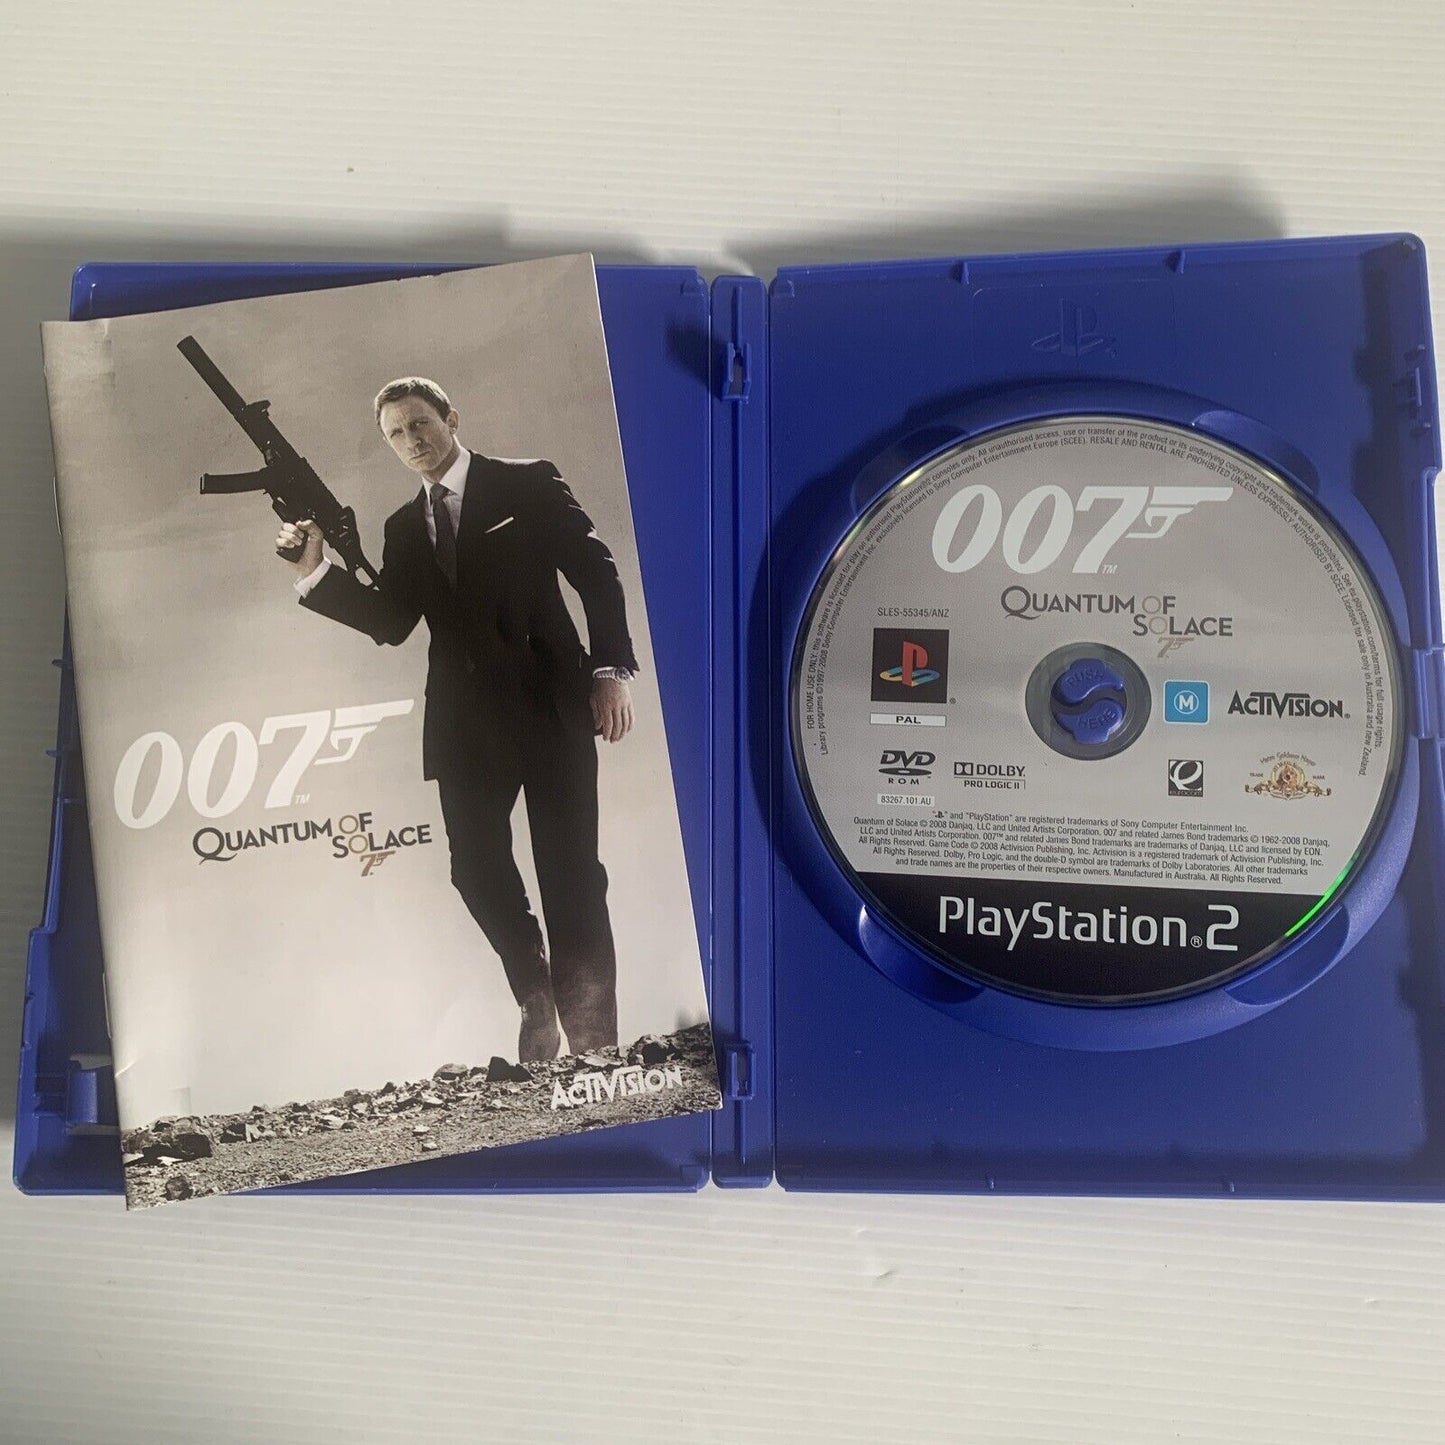 007 Quantum Of Solace PlayStation 2 PS2 Game